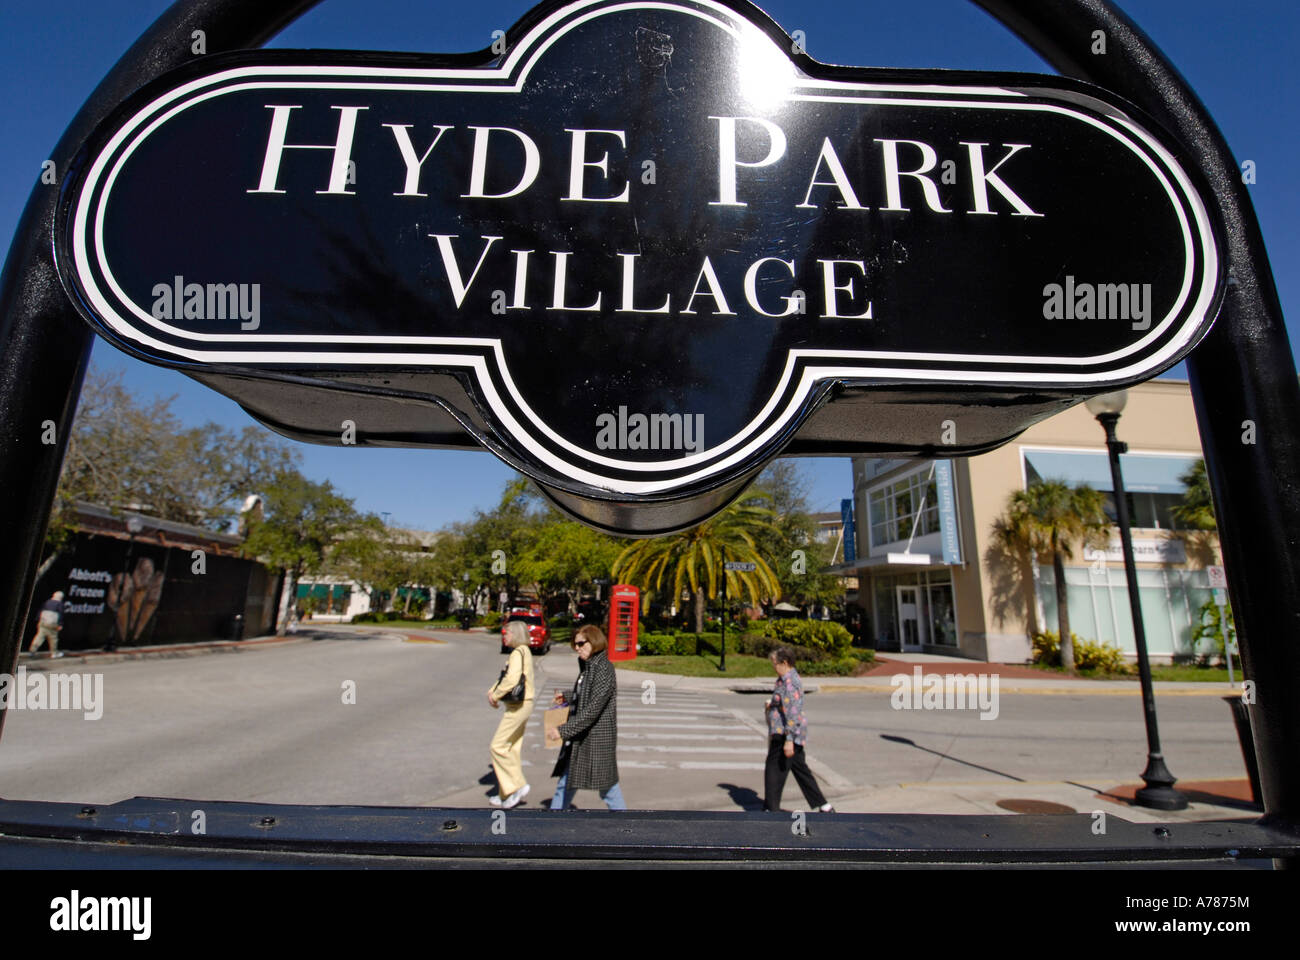 Hyde Park is a quaint upscale shopping district section of the city of Tampa Florida FL Stock Photo